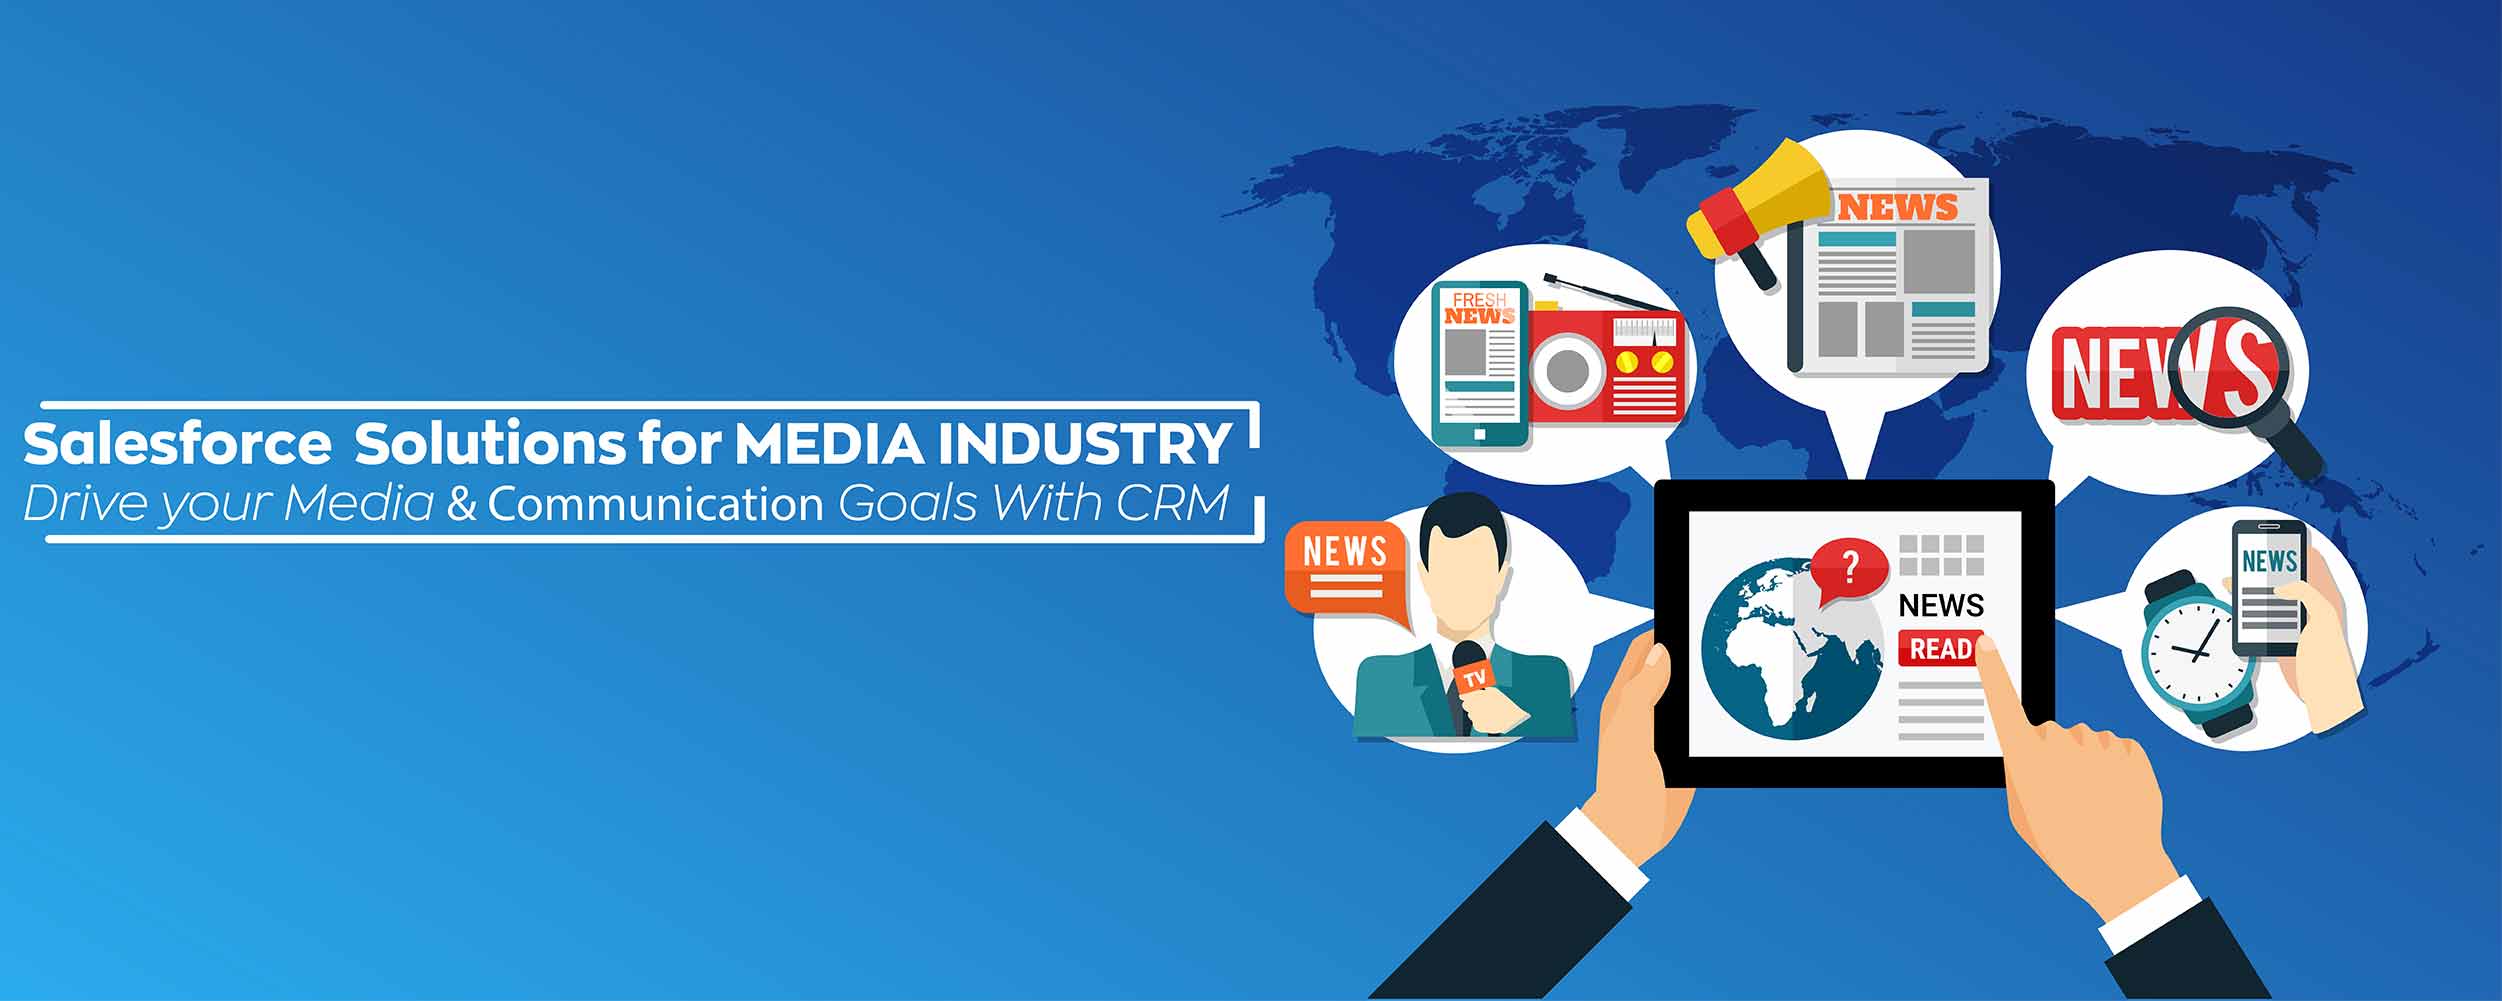 Dquip CRM for Media and Advertising Industry